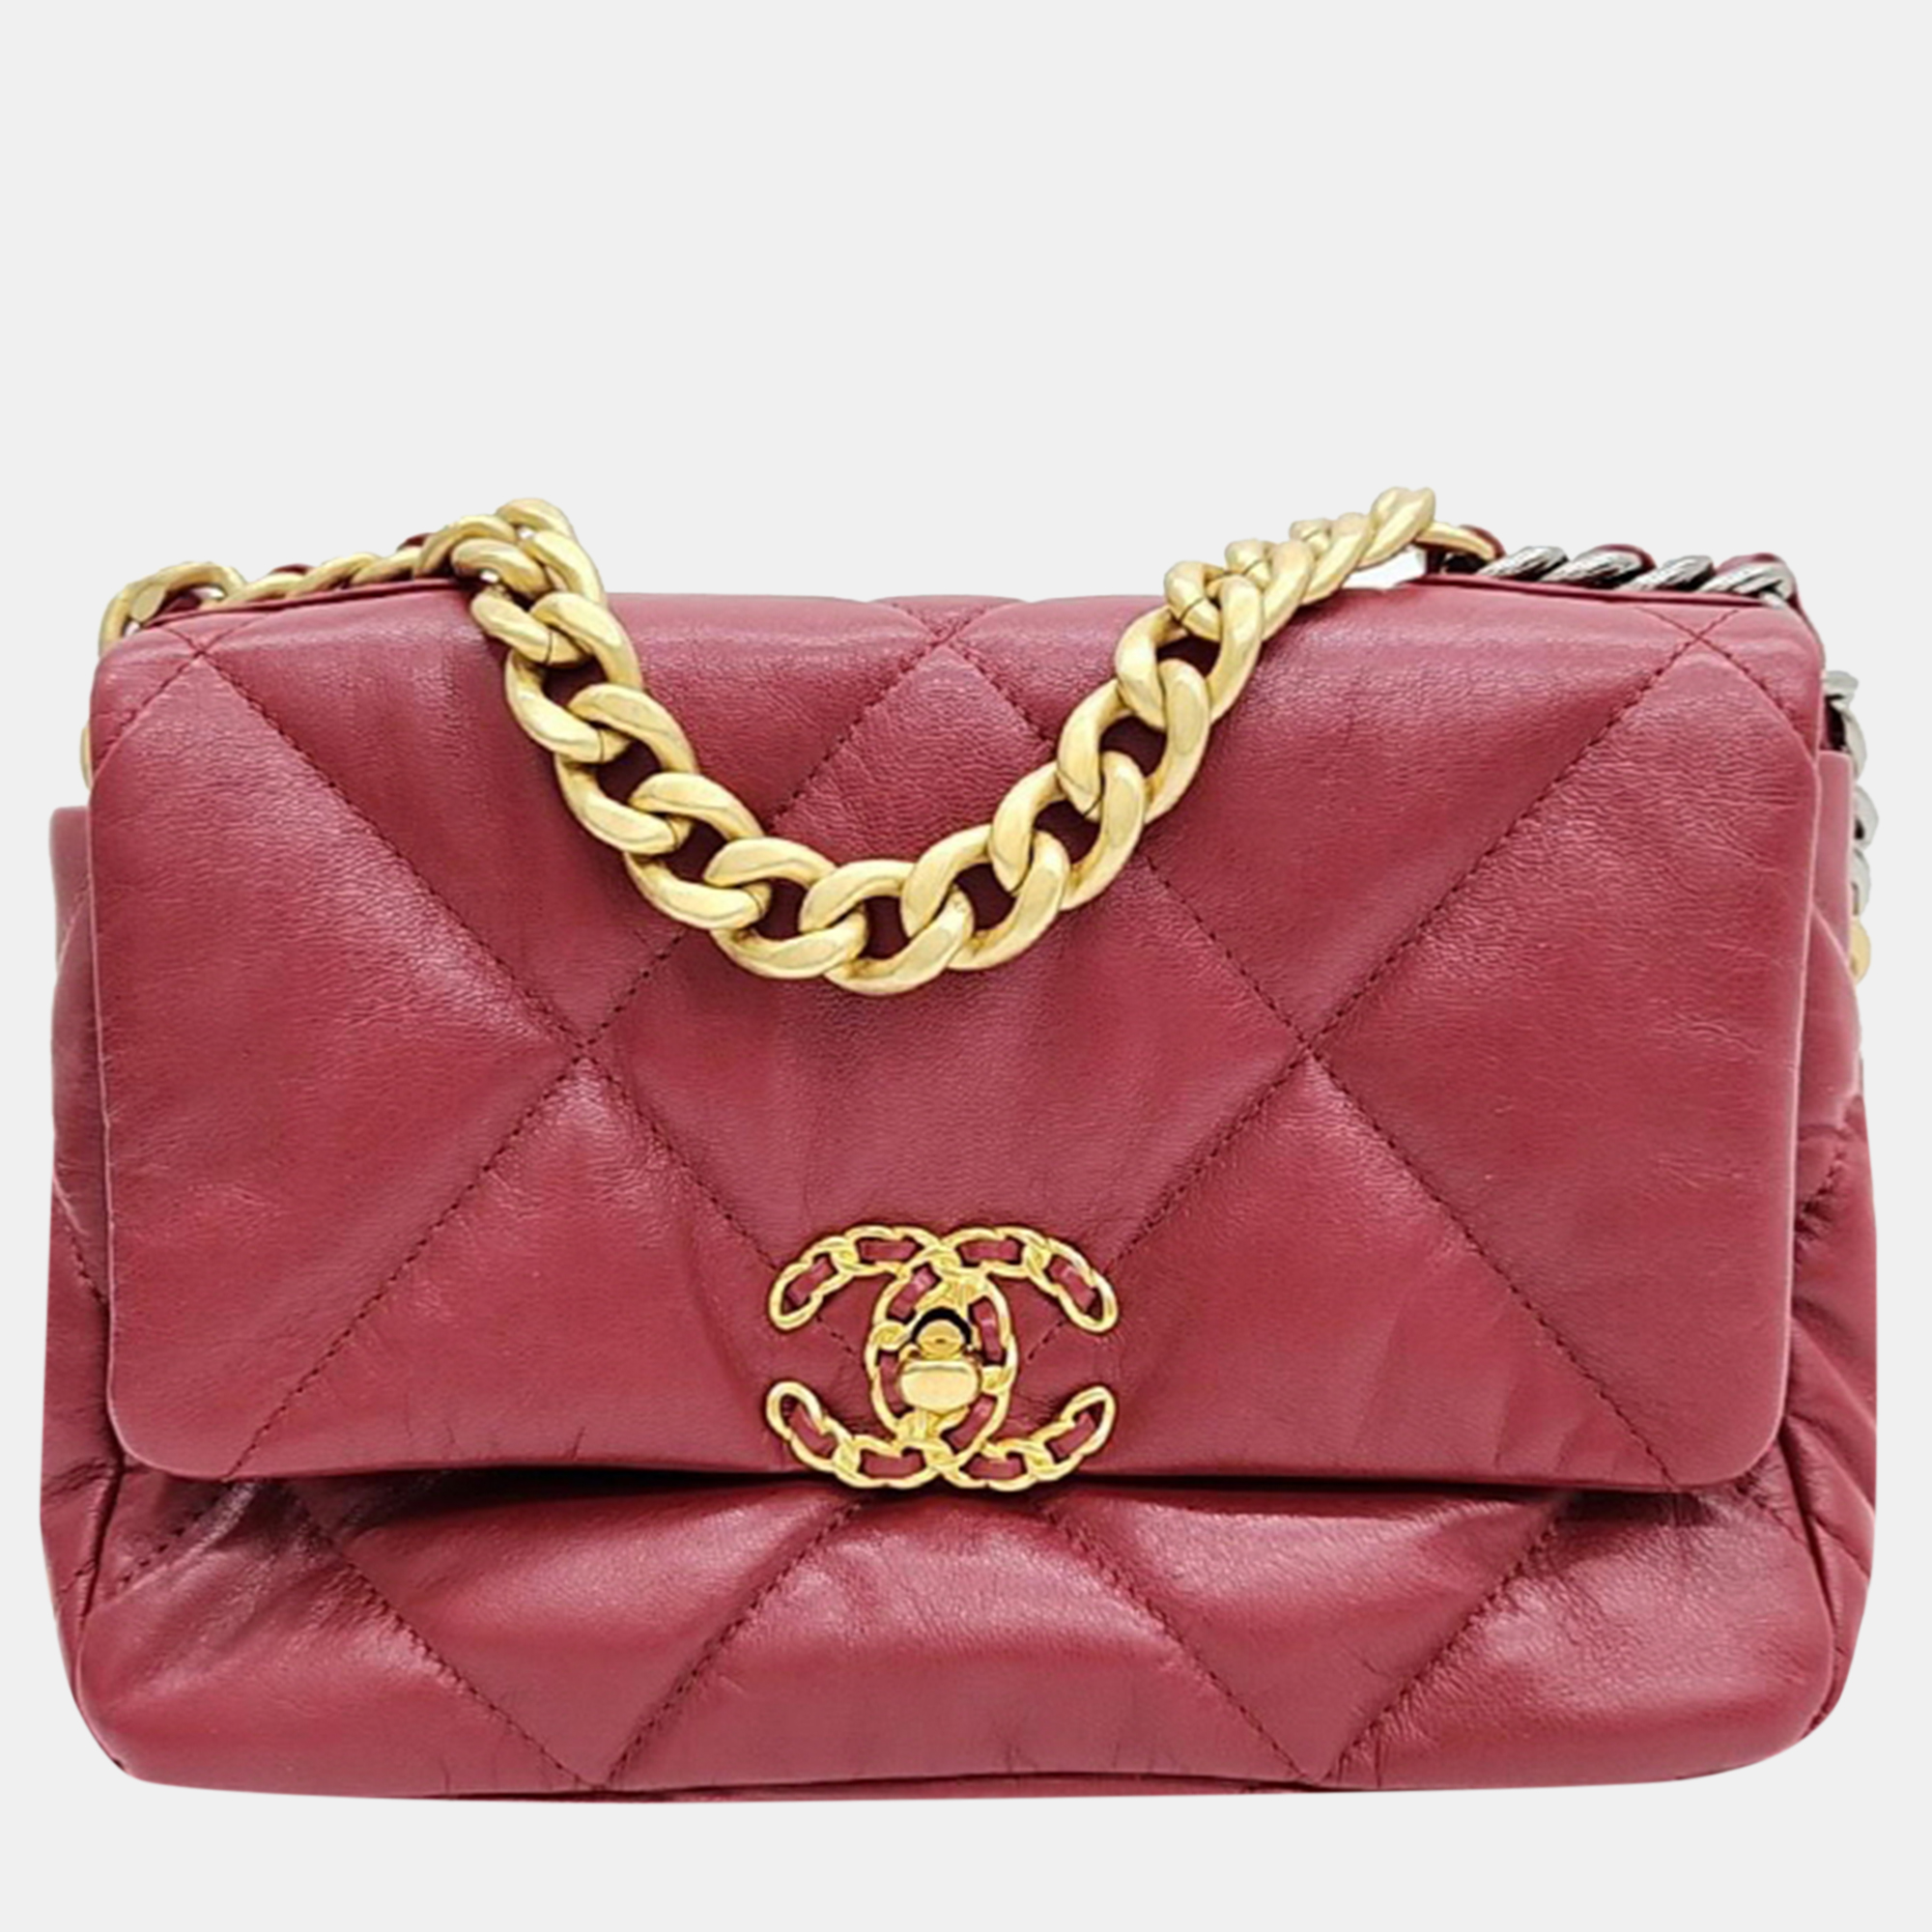 Chanel 19 Flap Bag Small